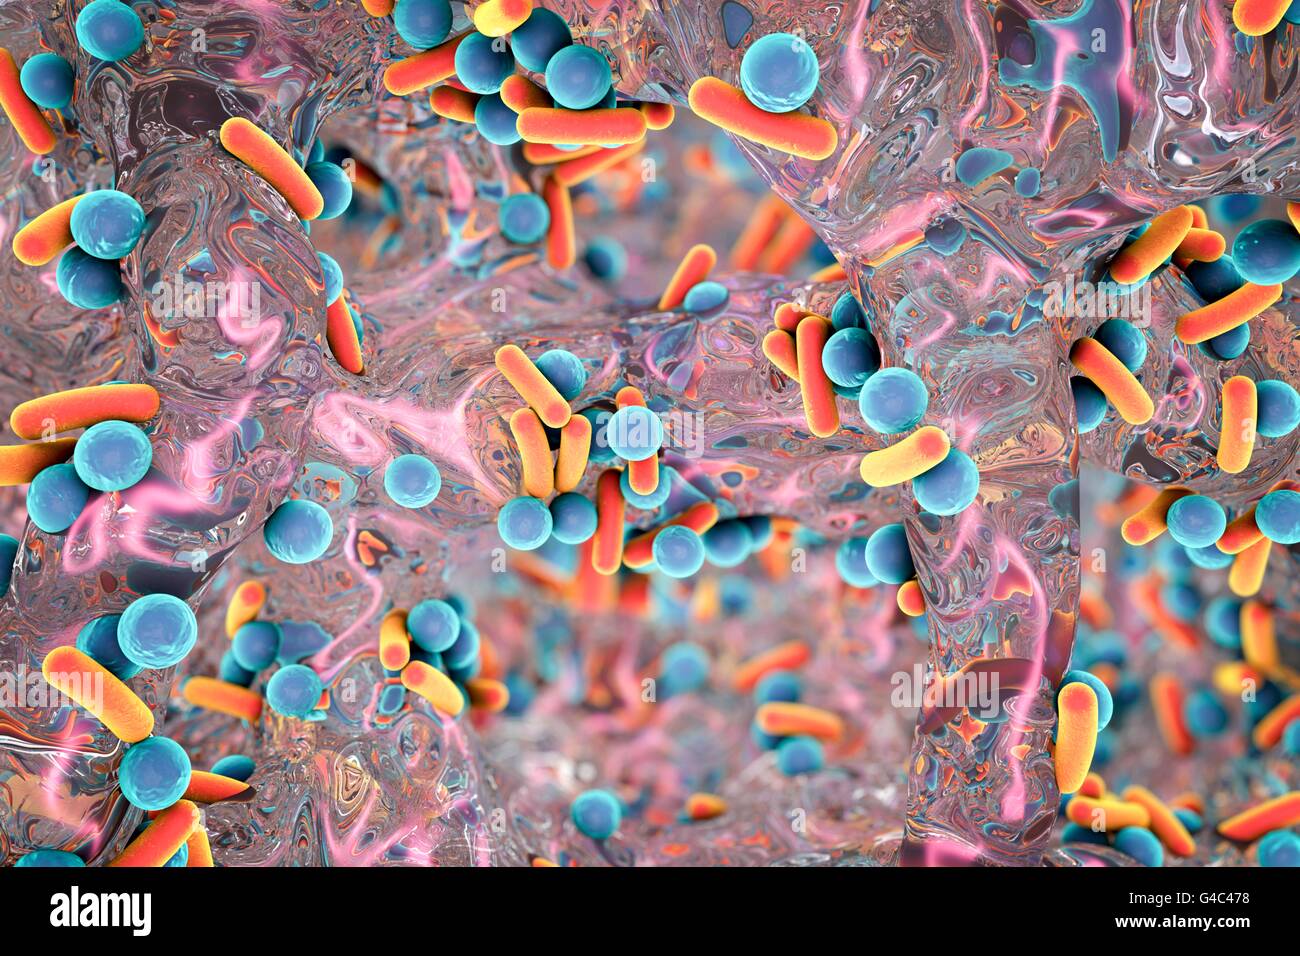 Rod-shaped bacteria inside biofilm, illustration. A biofilm is a colony of bacteria that forms a coating on a surface. Common places for biofilms to develop are in the mouth, where they can cause tooth cavities and gum disease, on contact lenses, where they can cause eye infections, on rocks submerged in water, and on industrial equipment, where they can cause fouling. Stock Photo